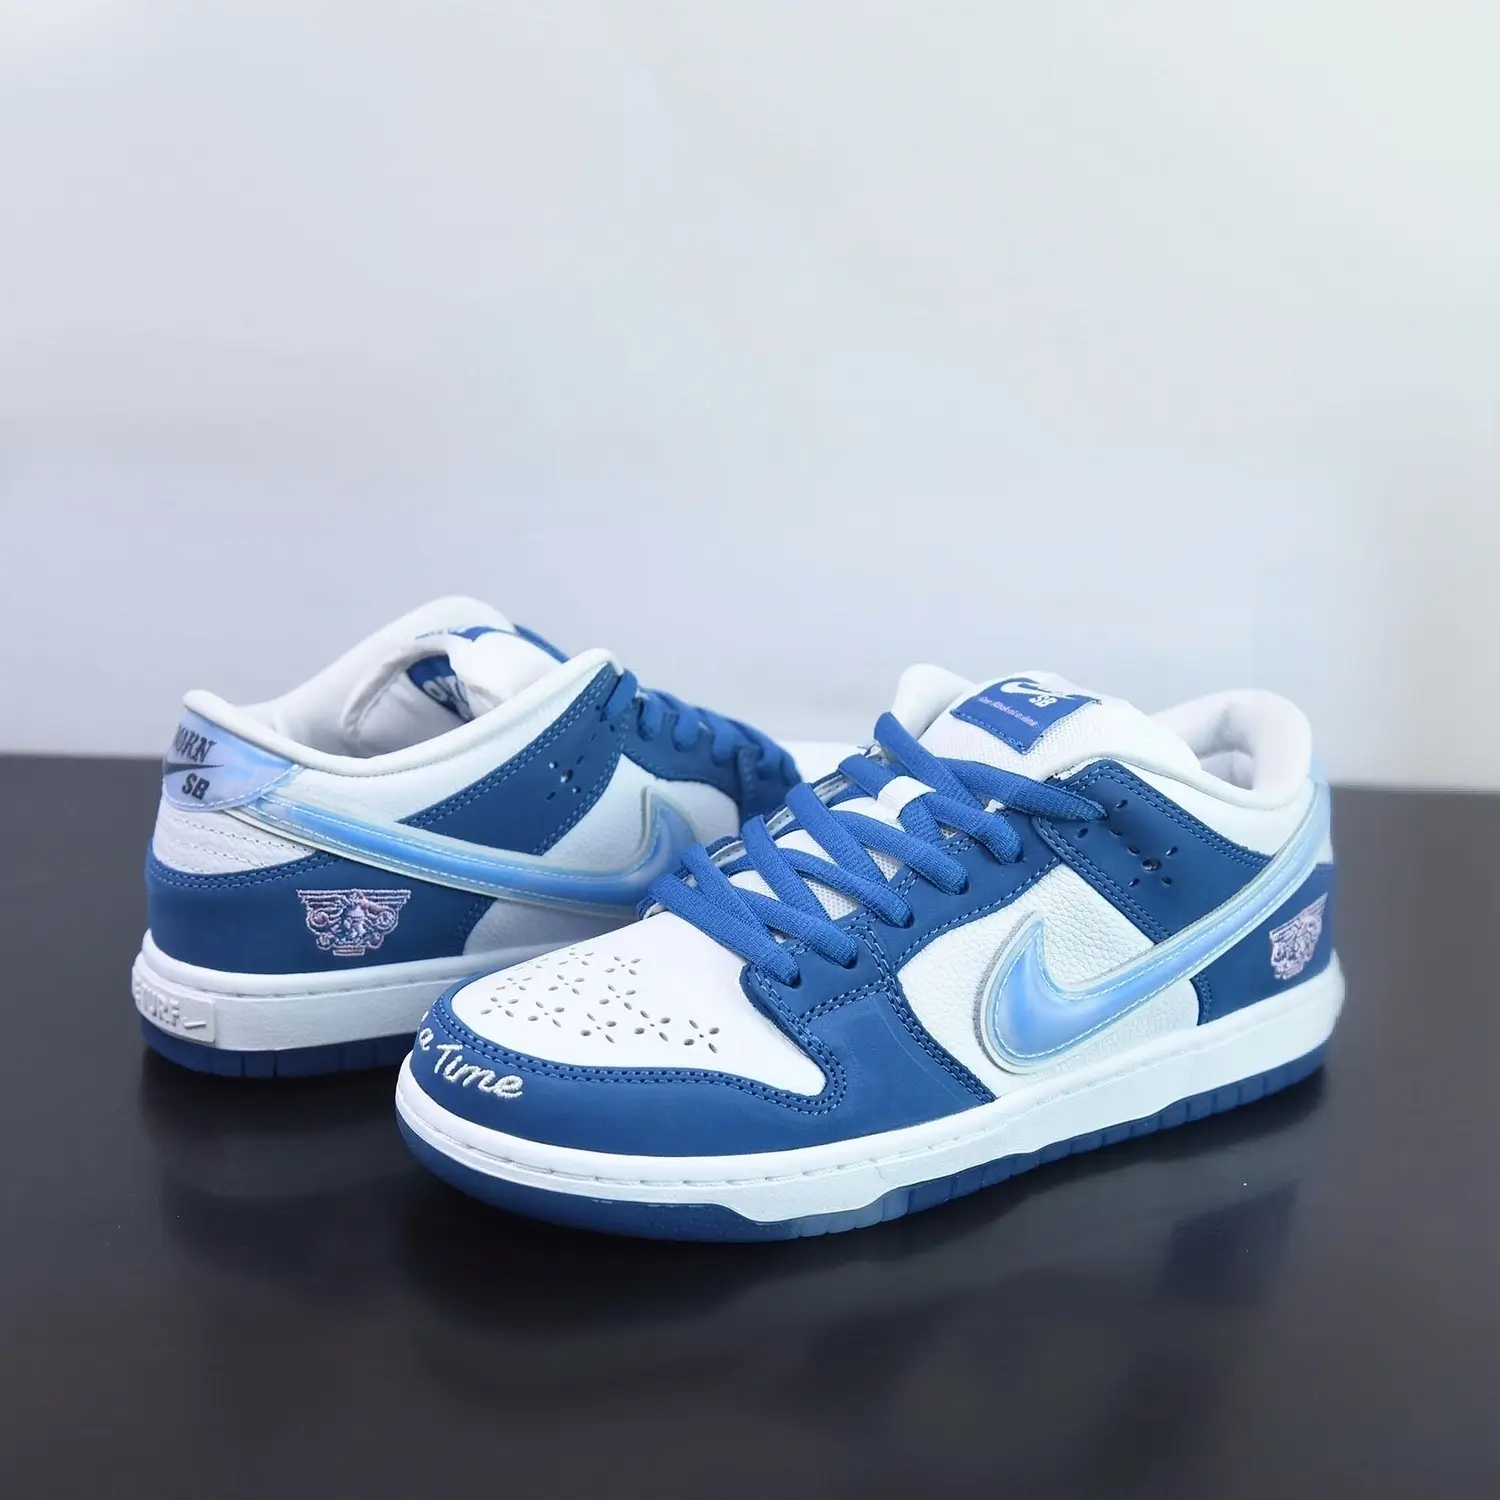 Born x Raised x Dunk Low SB 'One Block at a Time' FN7819-400 - Store on ...